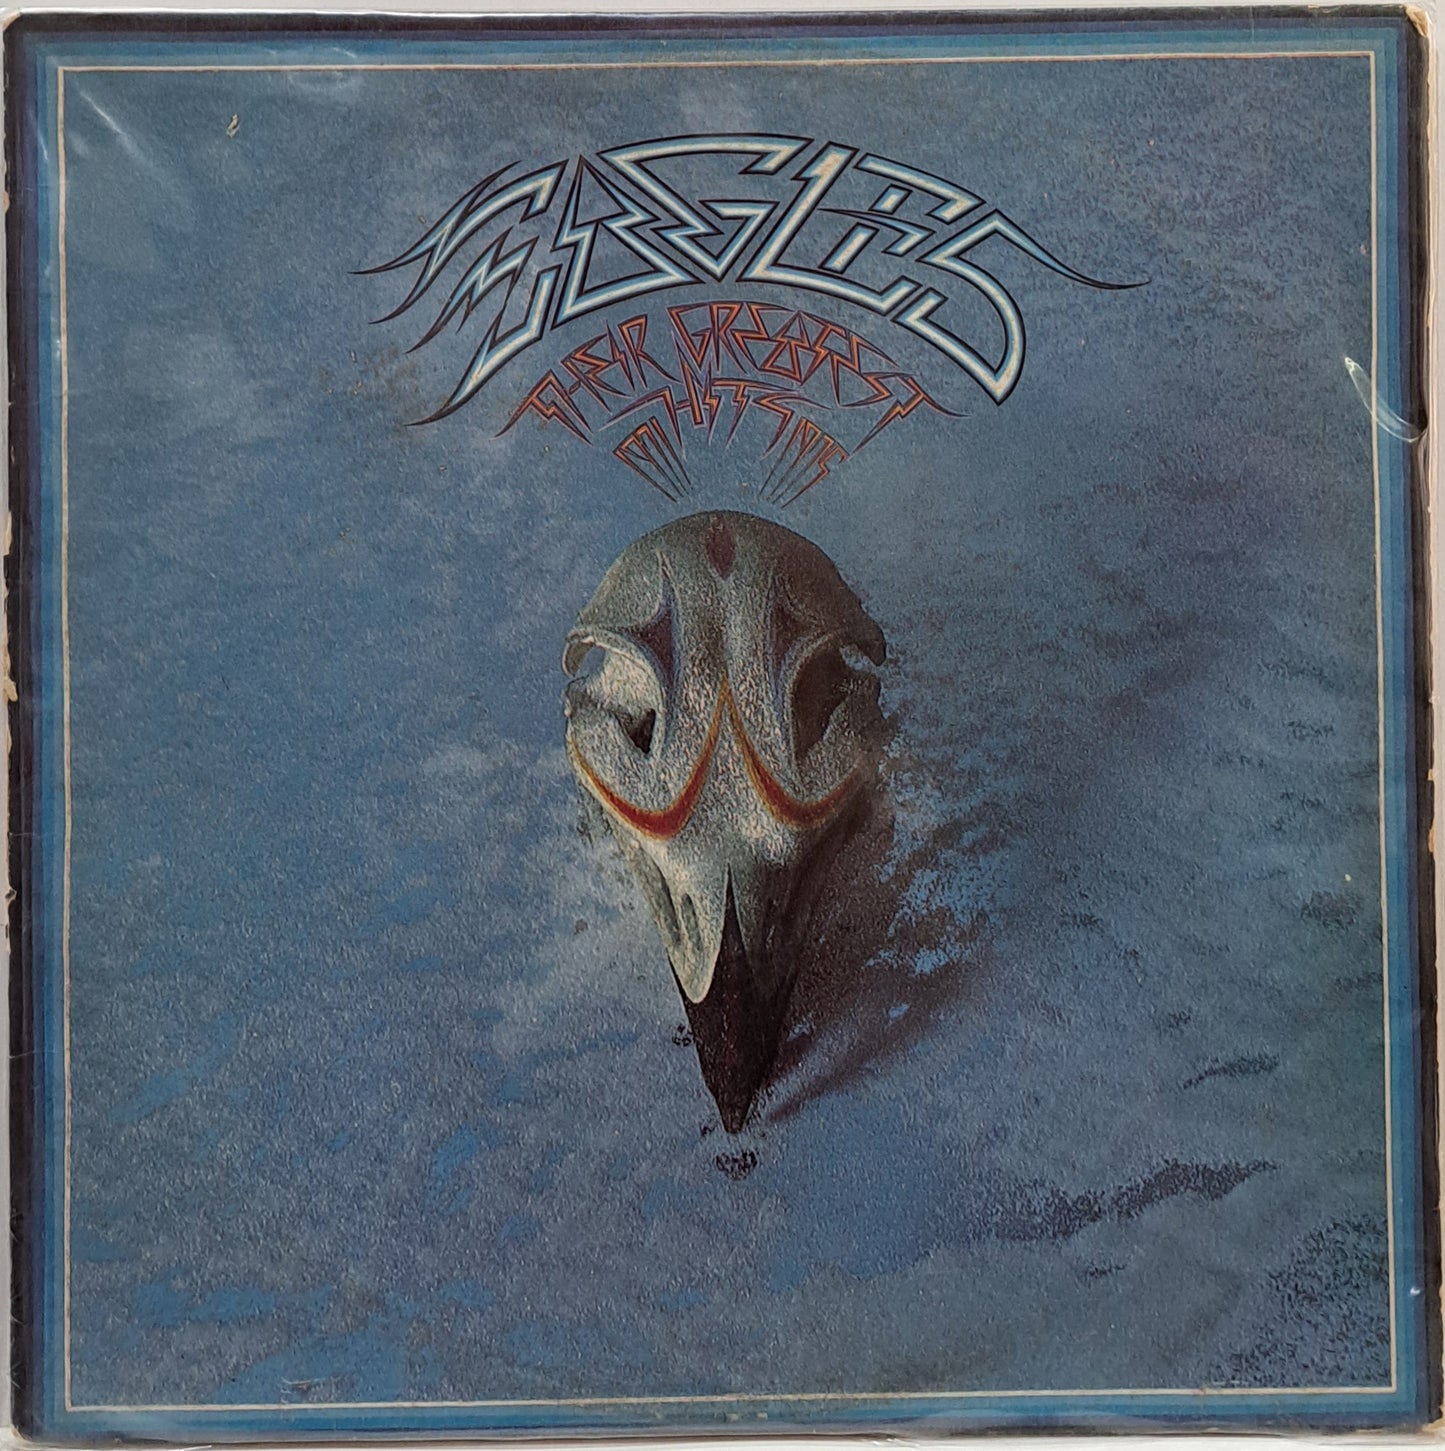 EAGLES - THEIR GREATEST HITS LP